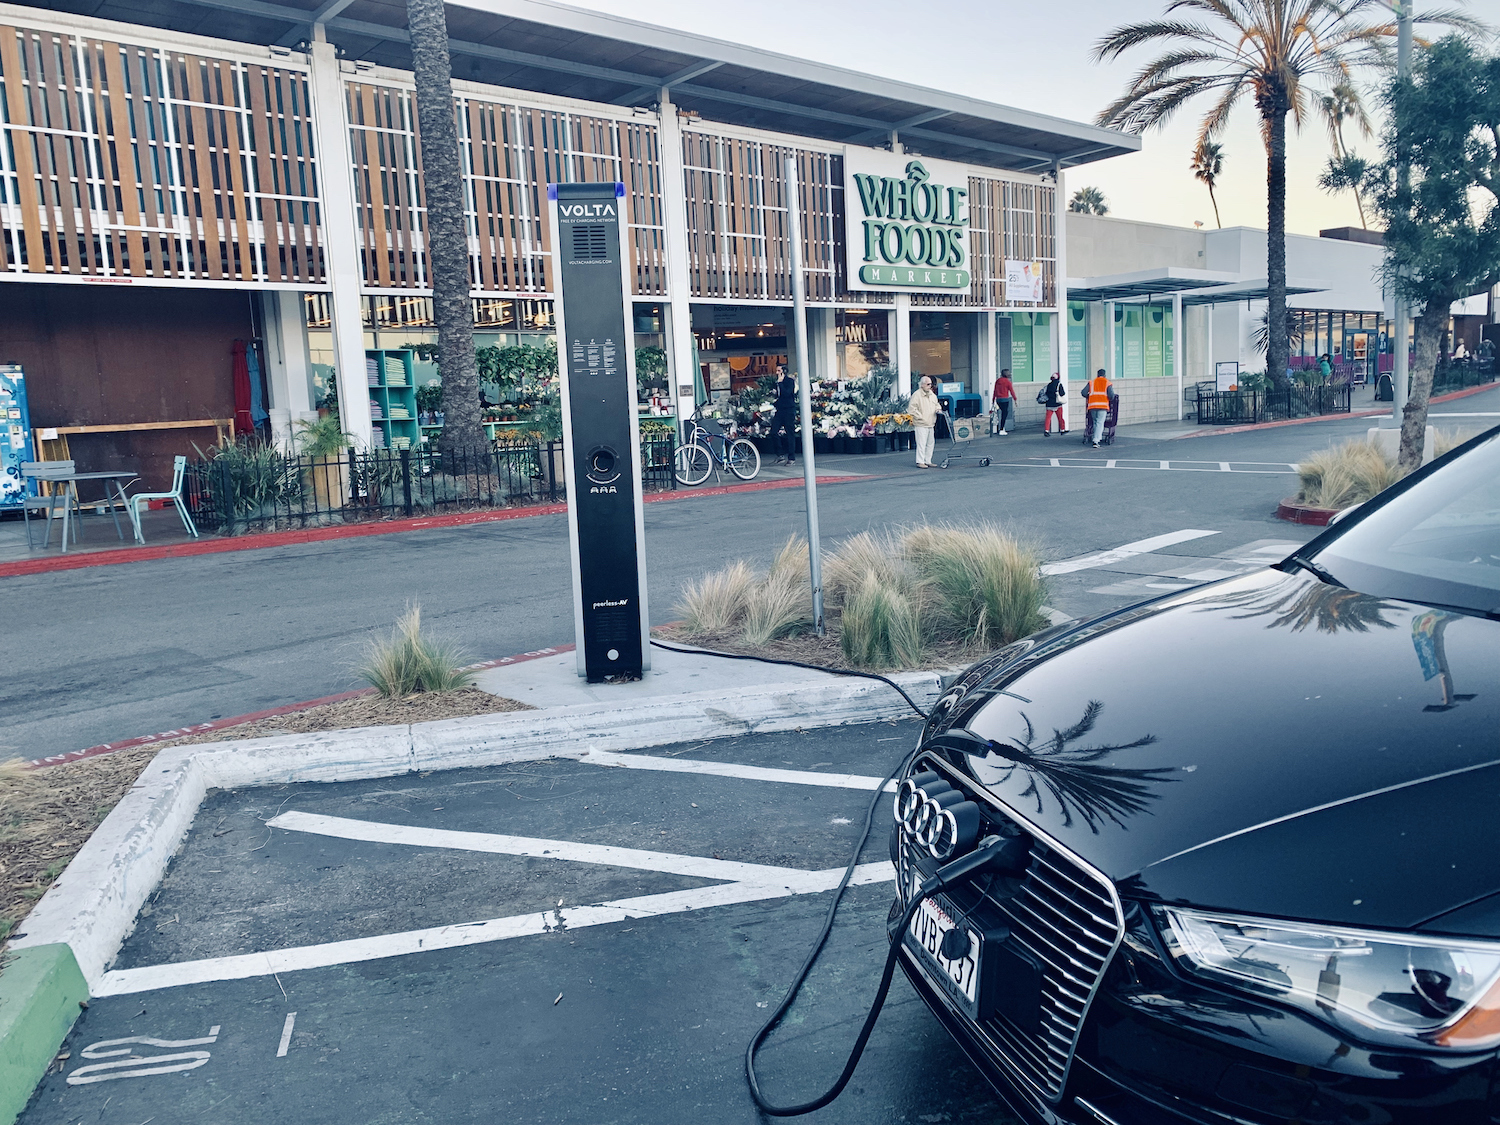 Car charges outside Whole Foods